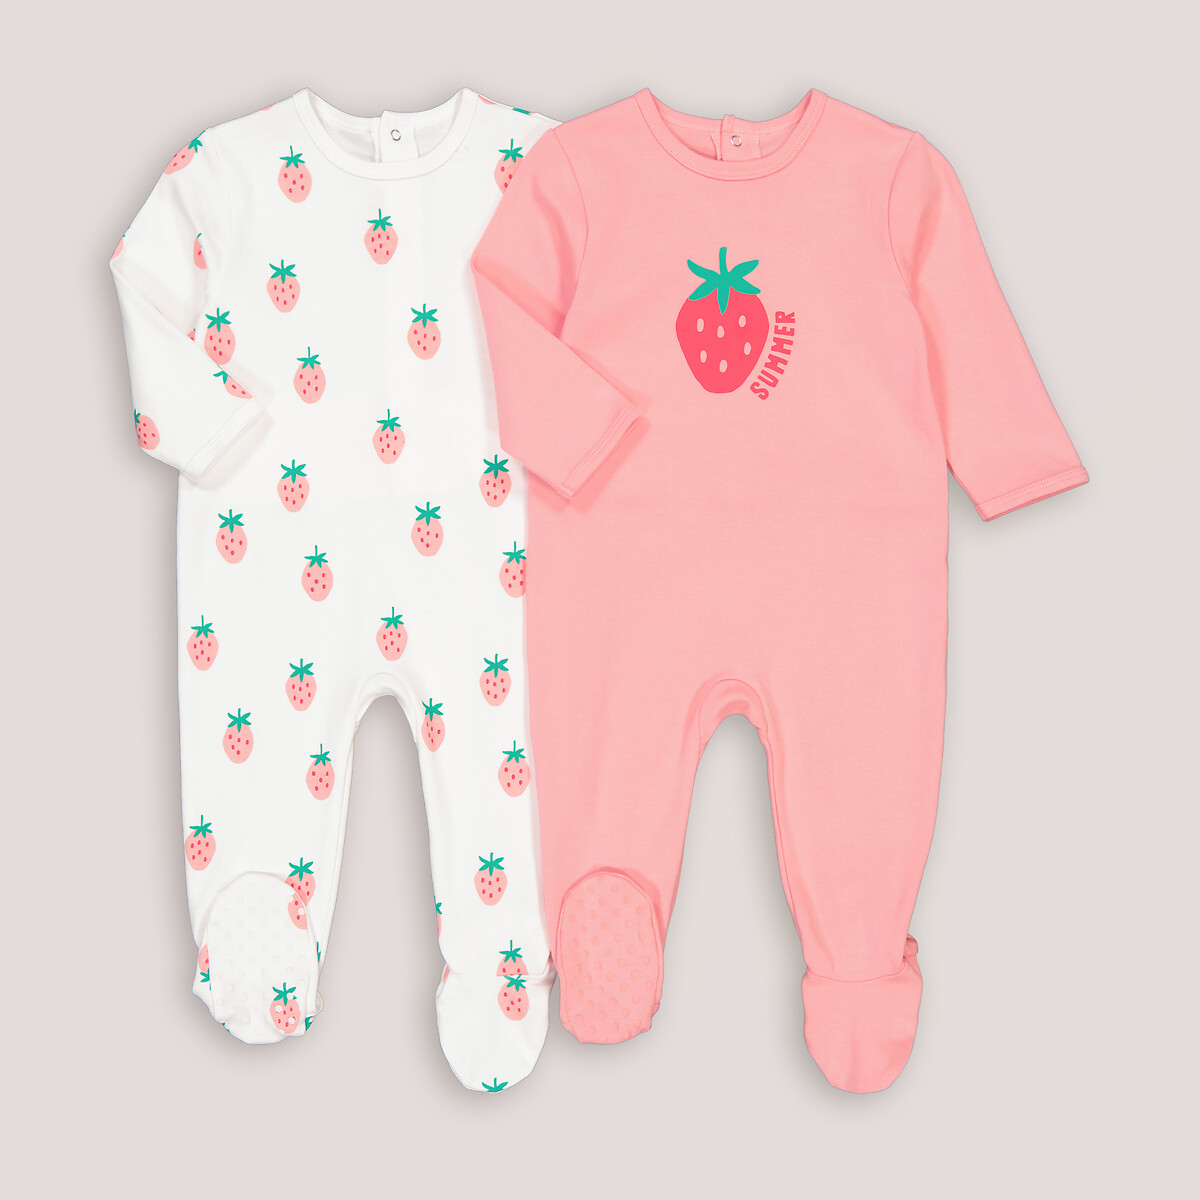 Pack of 2 Sleepsuits in Strawberry Print Cotton